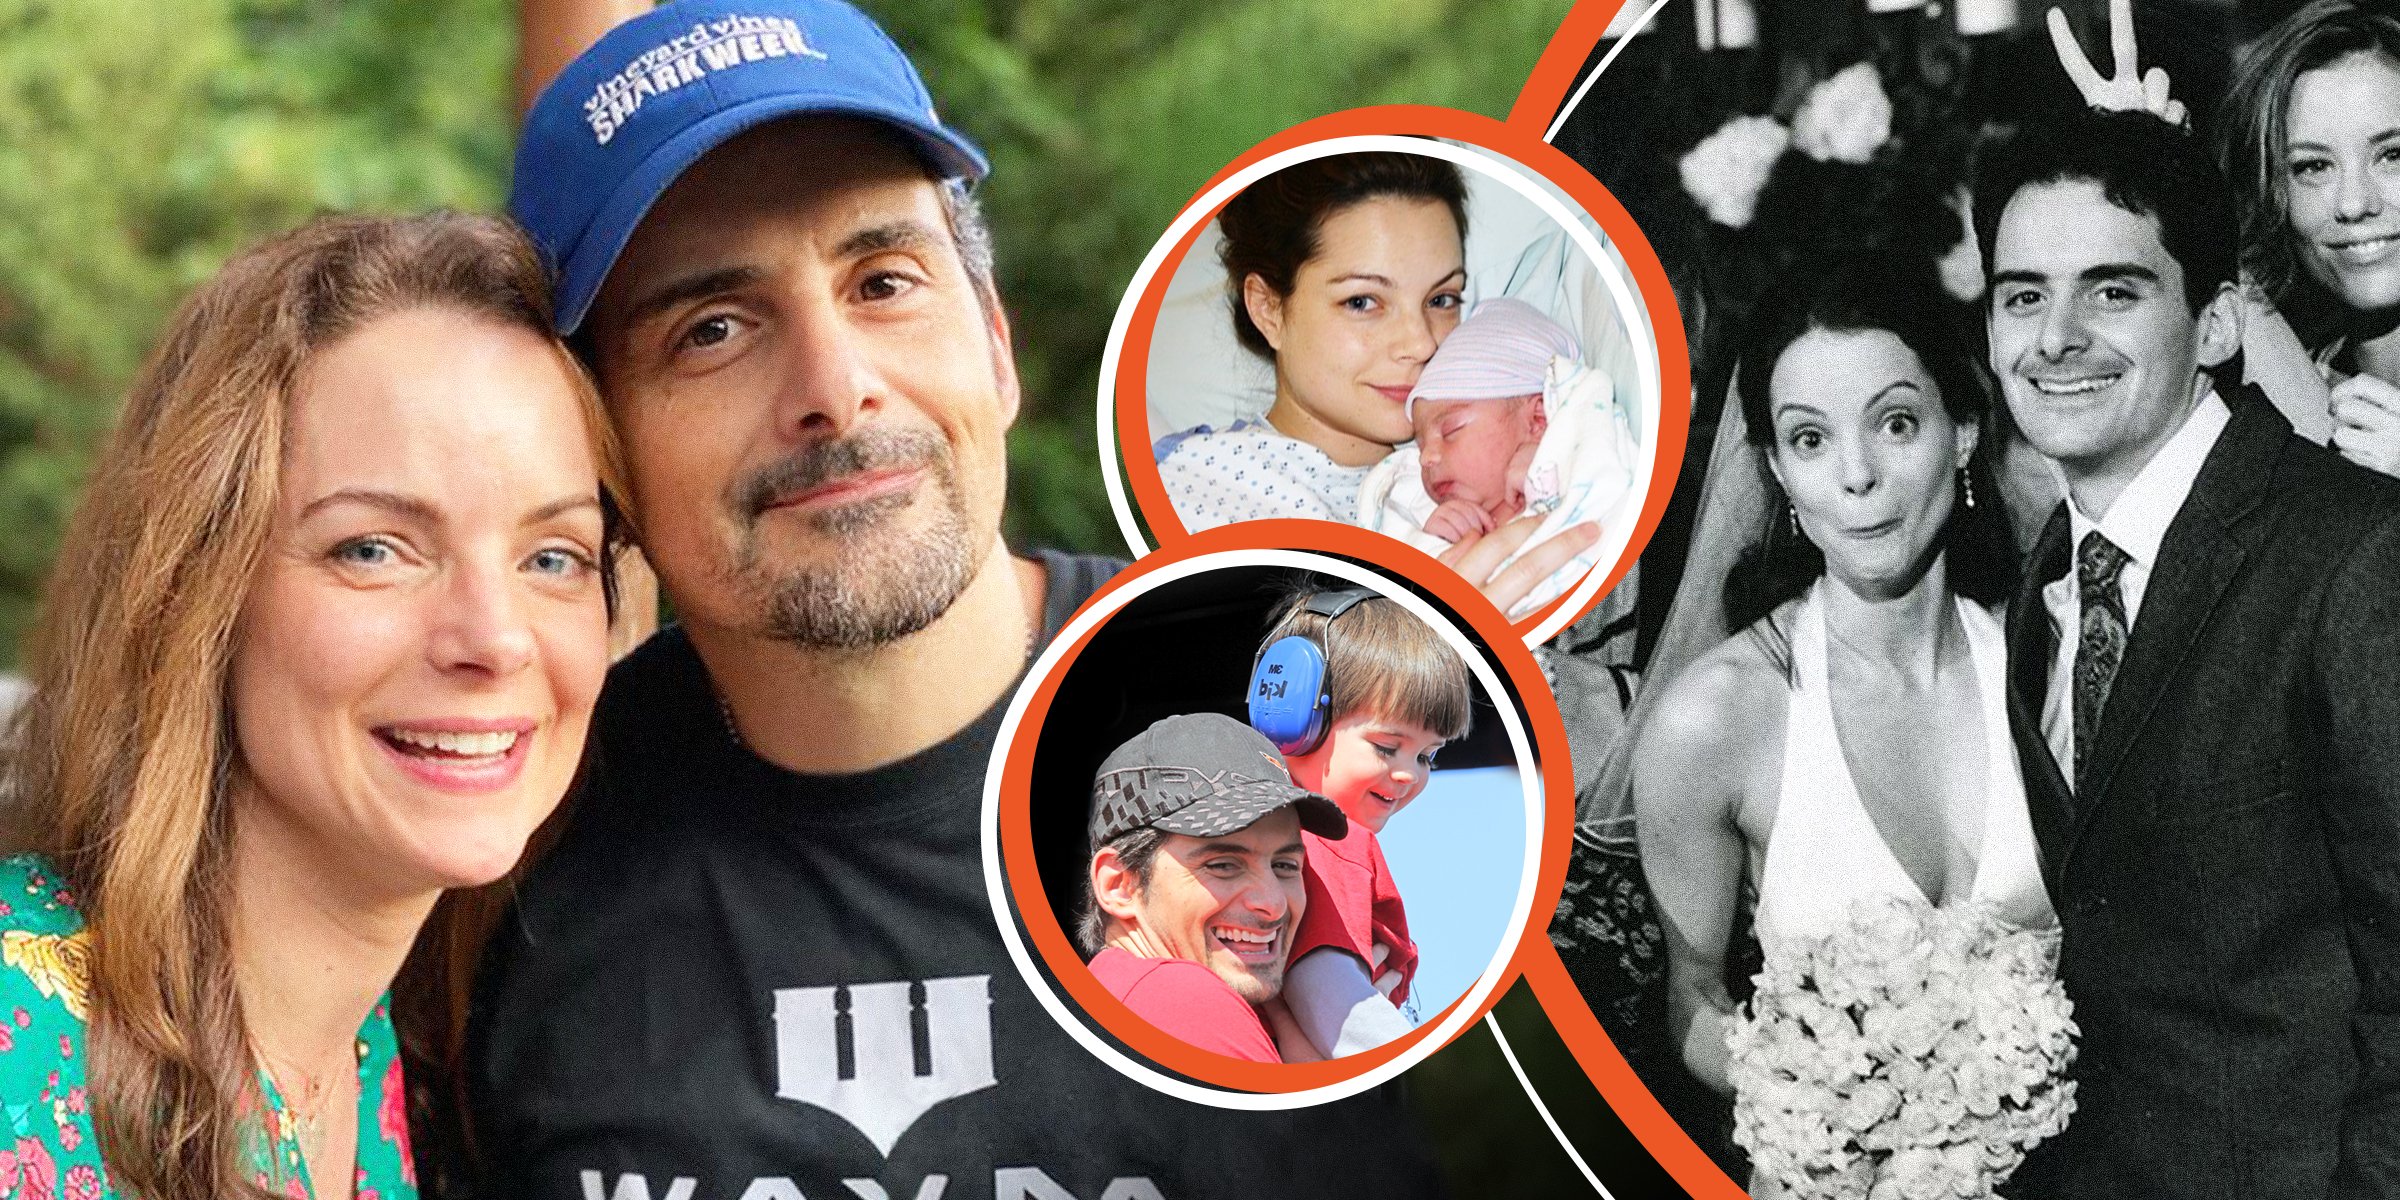 Brad Paisley and Kimberly Williams-Paisley | Brad Paisley | Kimberly Williams-Paisley William Huckleberry | Brad Paisley and Kimberly Williams-Paisley | Source: Getty Images | instagram.com/kimberlywilliamspaisley | instagram.com/bradpaisley 